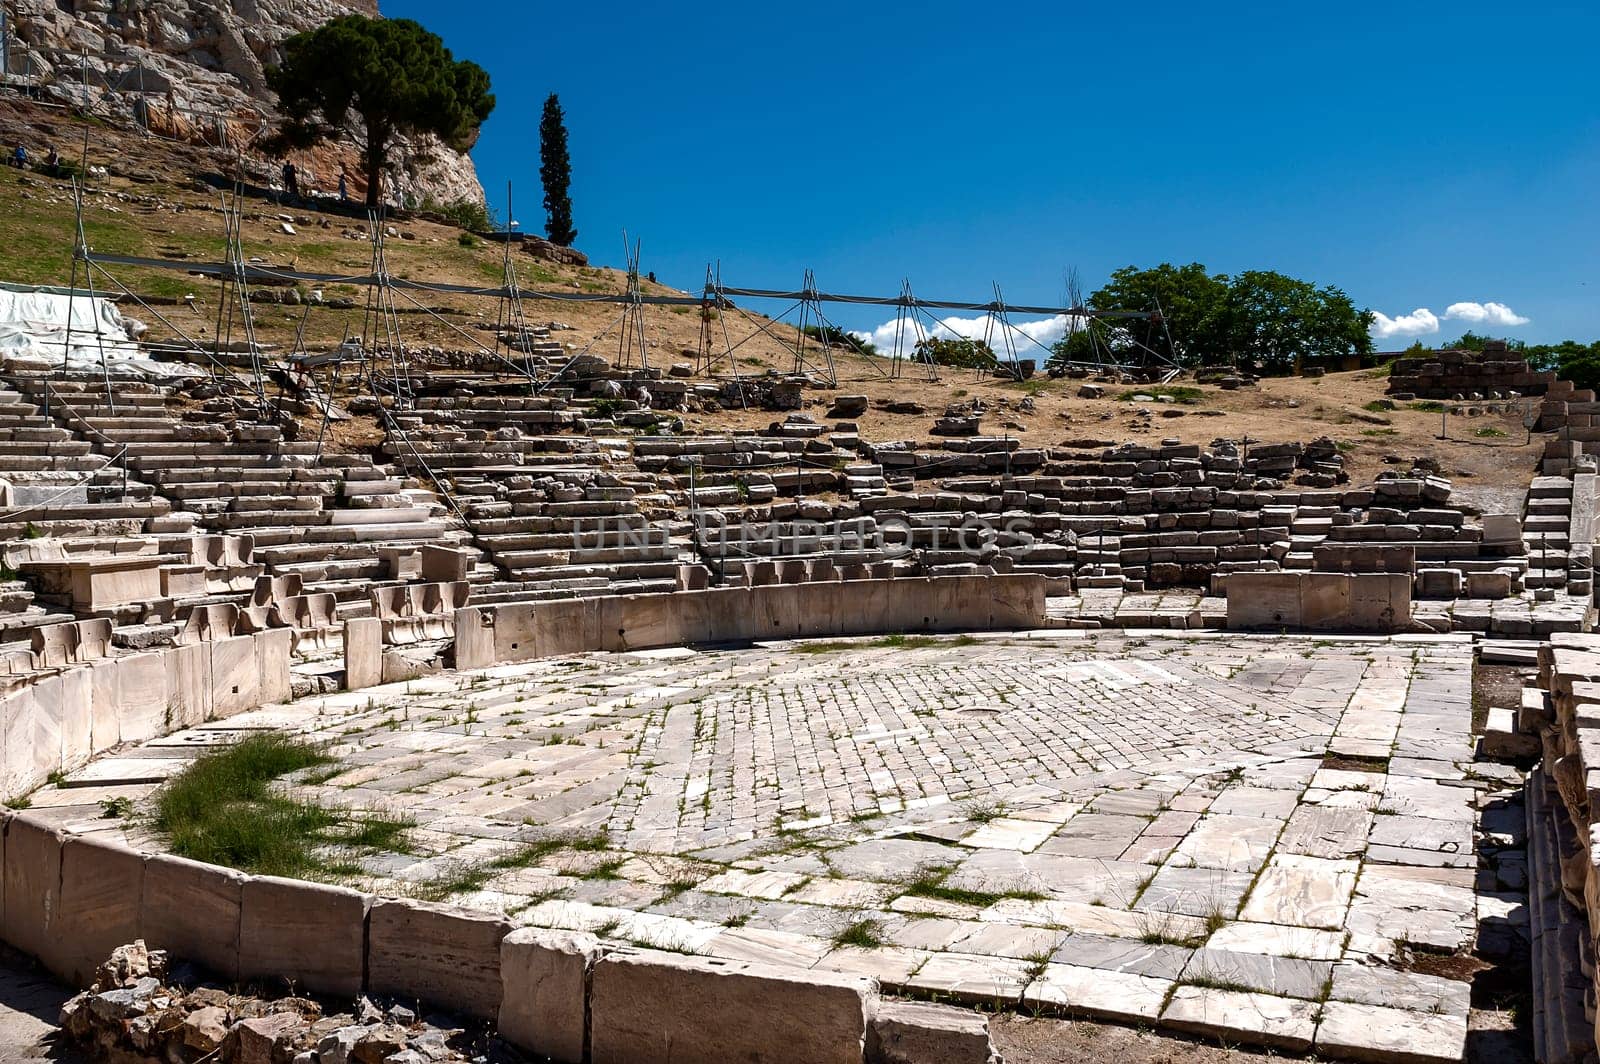 Theatre of Dionysus under Acropolis in Athens,Greece by Giamplume